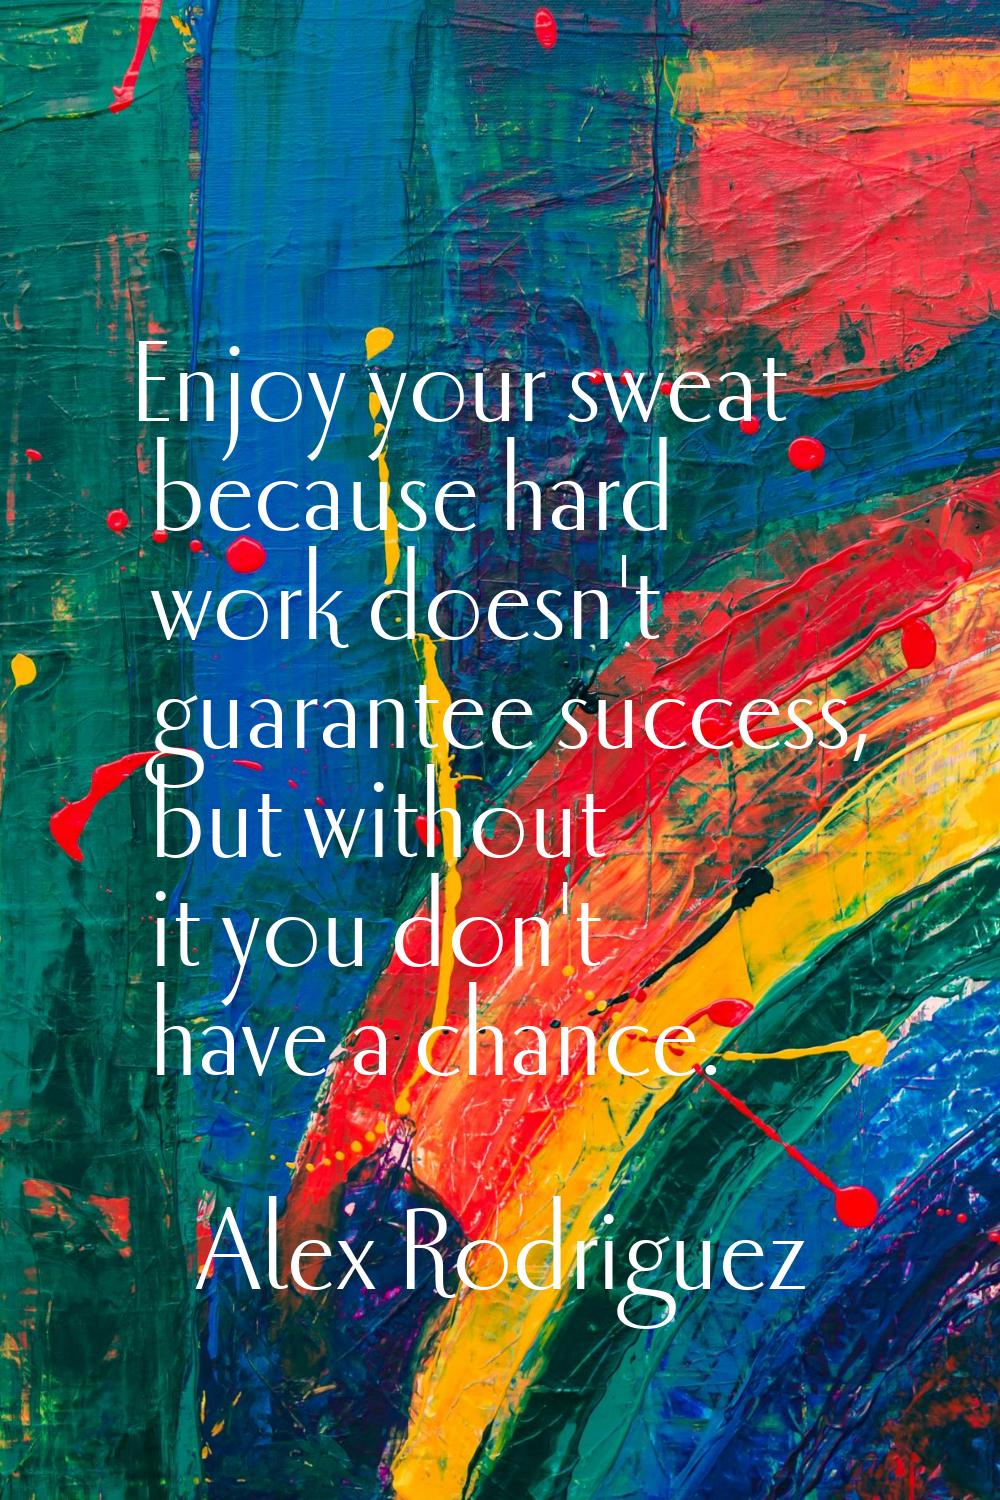 Enjoy your sweat because hard work doesn't guarantee success, but without it you don't have a chanc